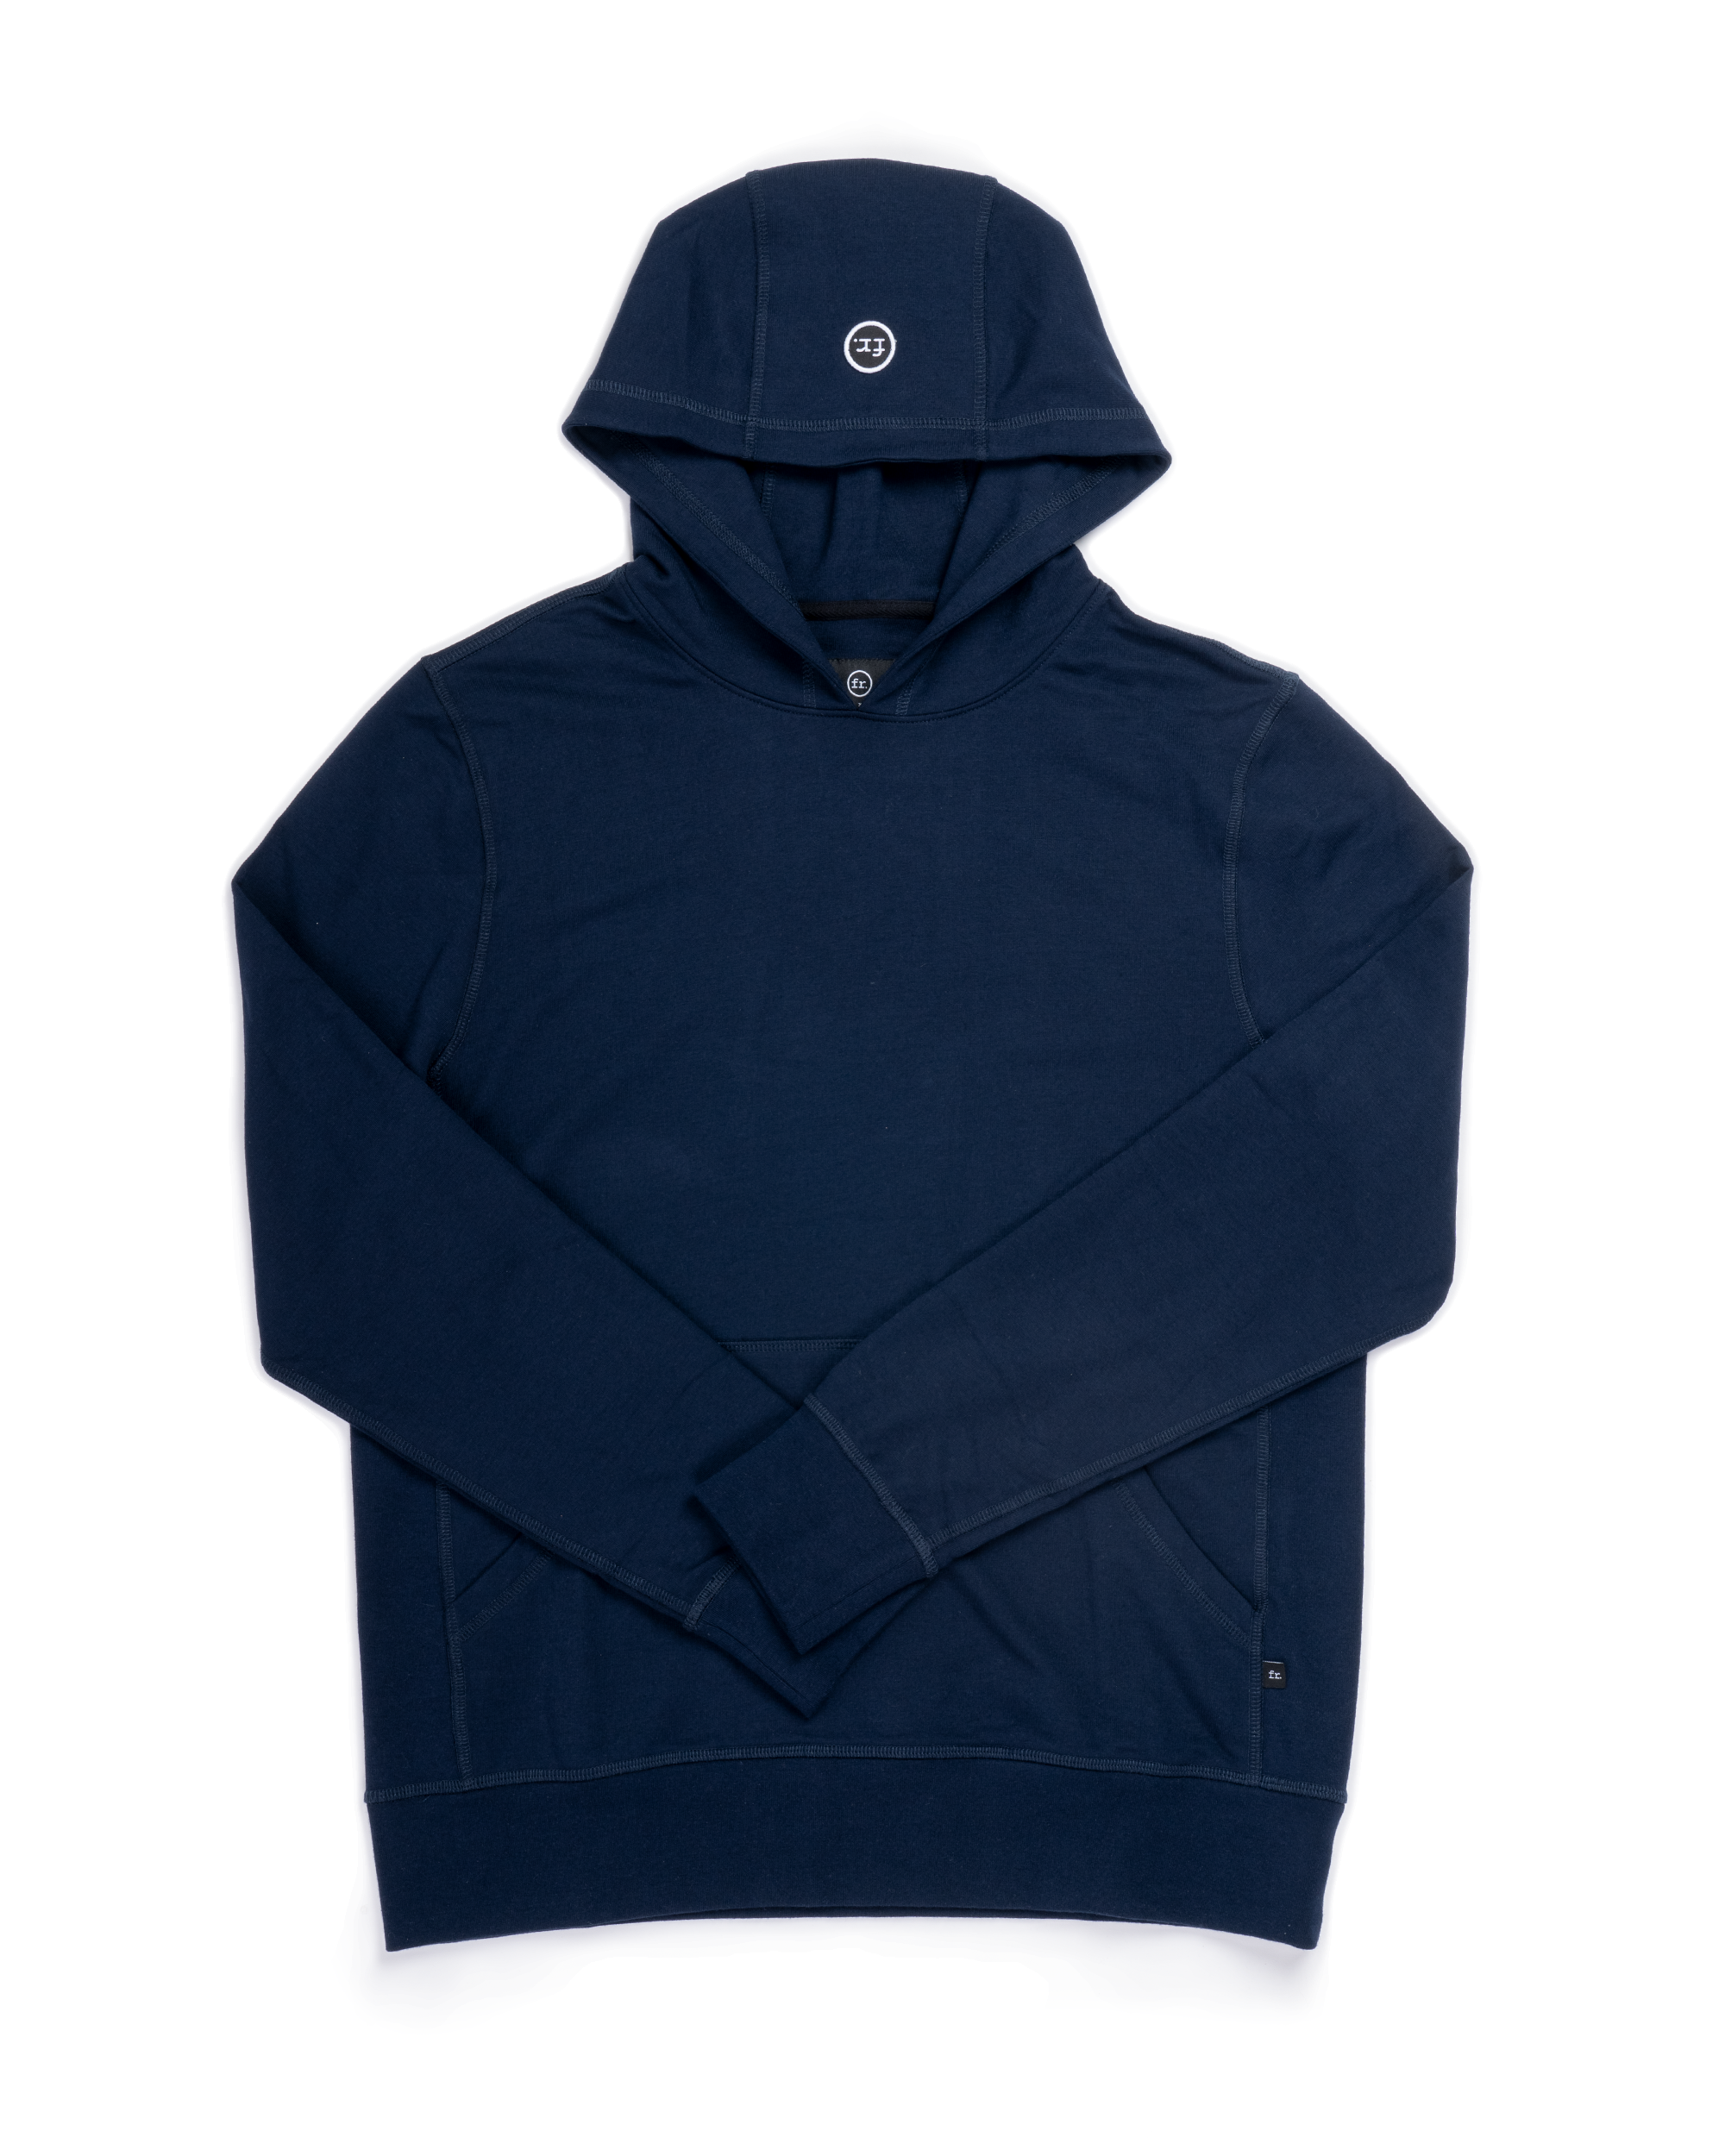 Performance Hooded Pullover Navy - Foreign Rider Co.